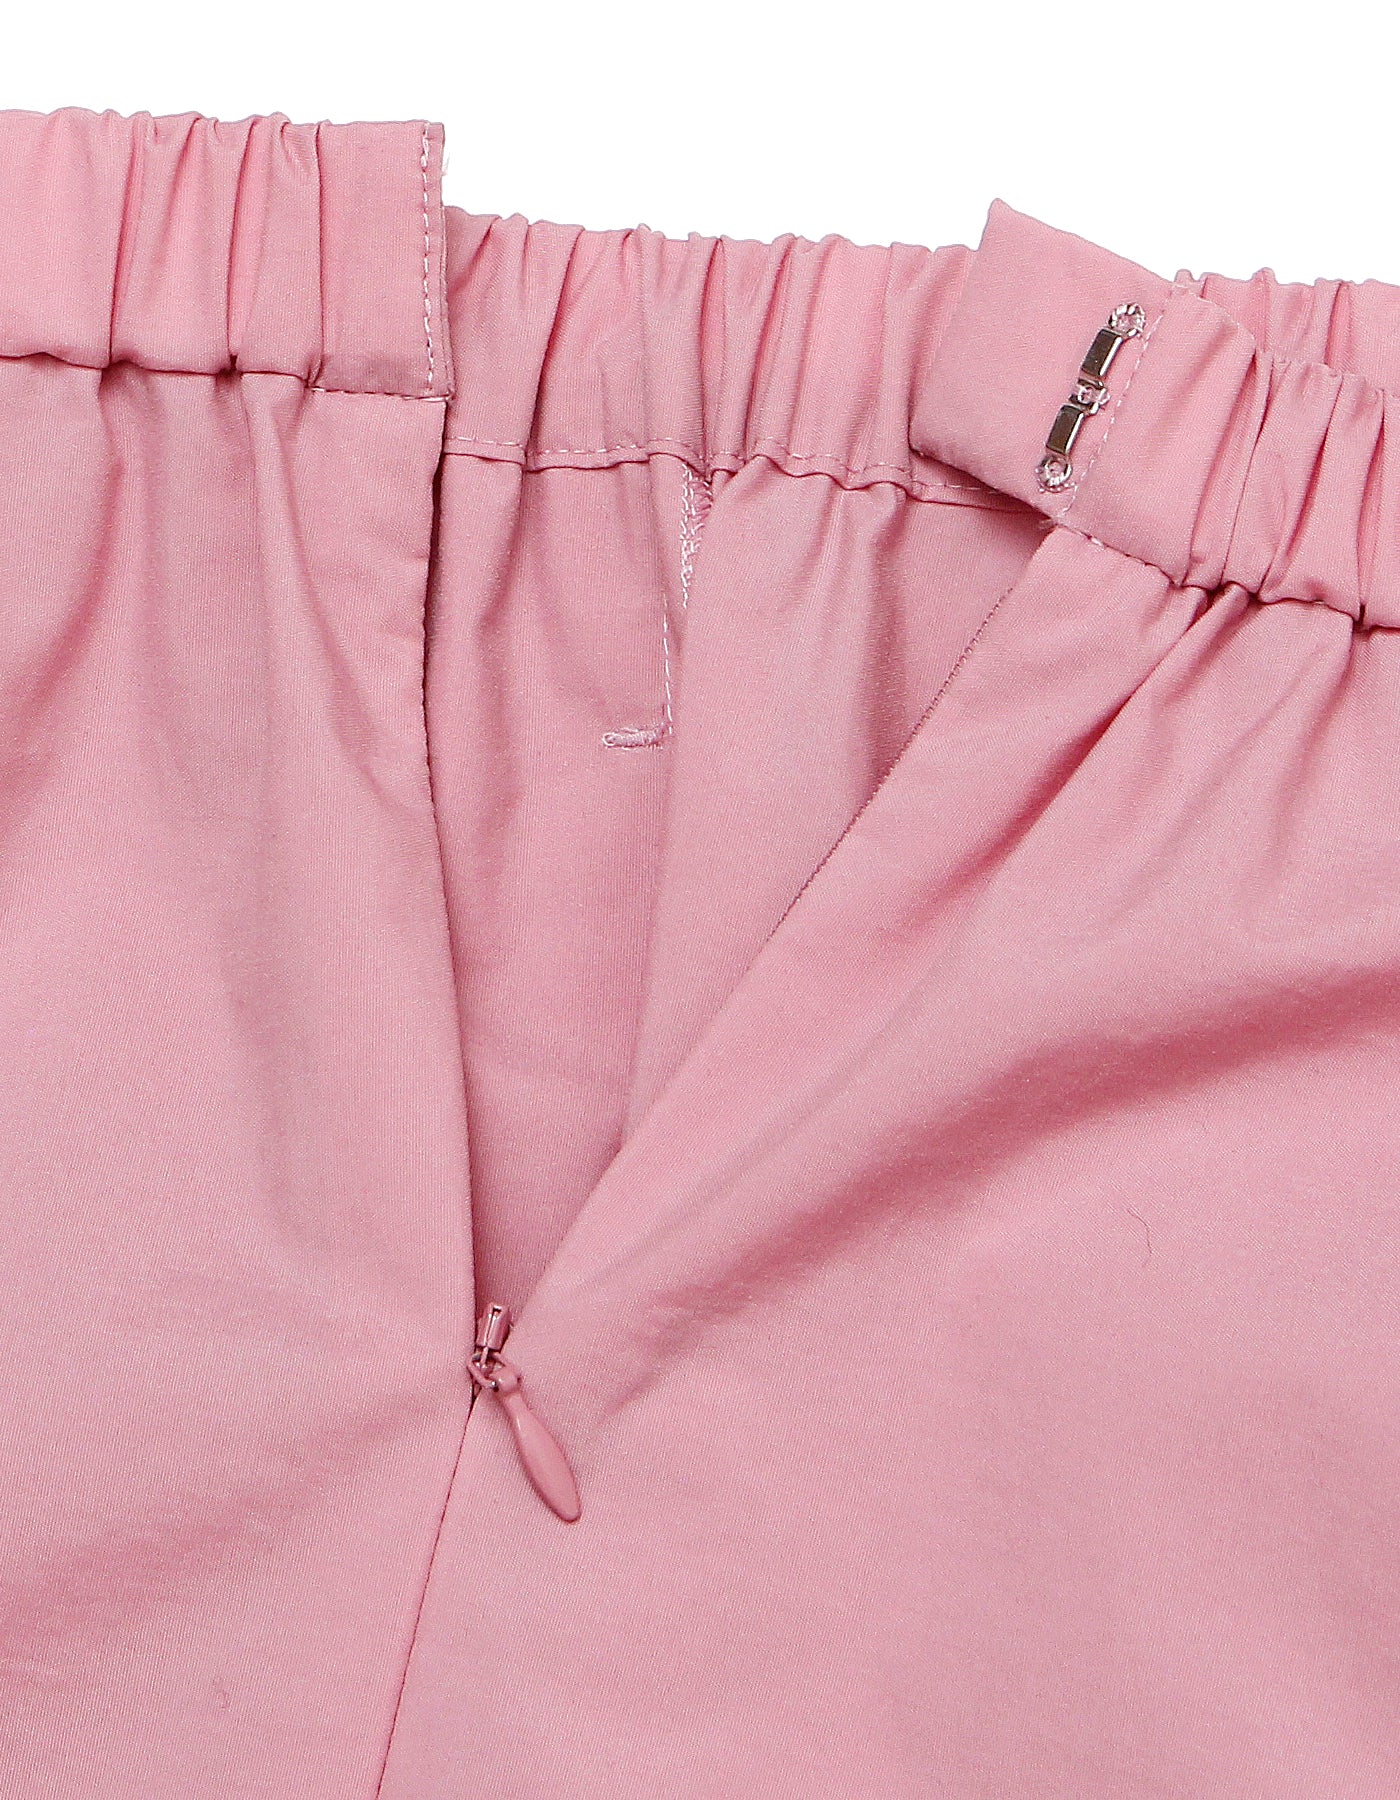 little sunny bite と pink house Girly pants / PINK